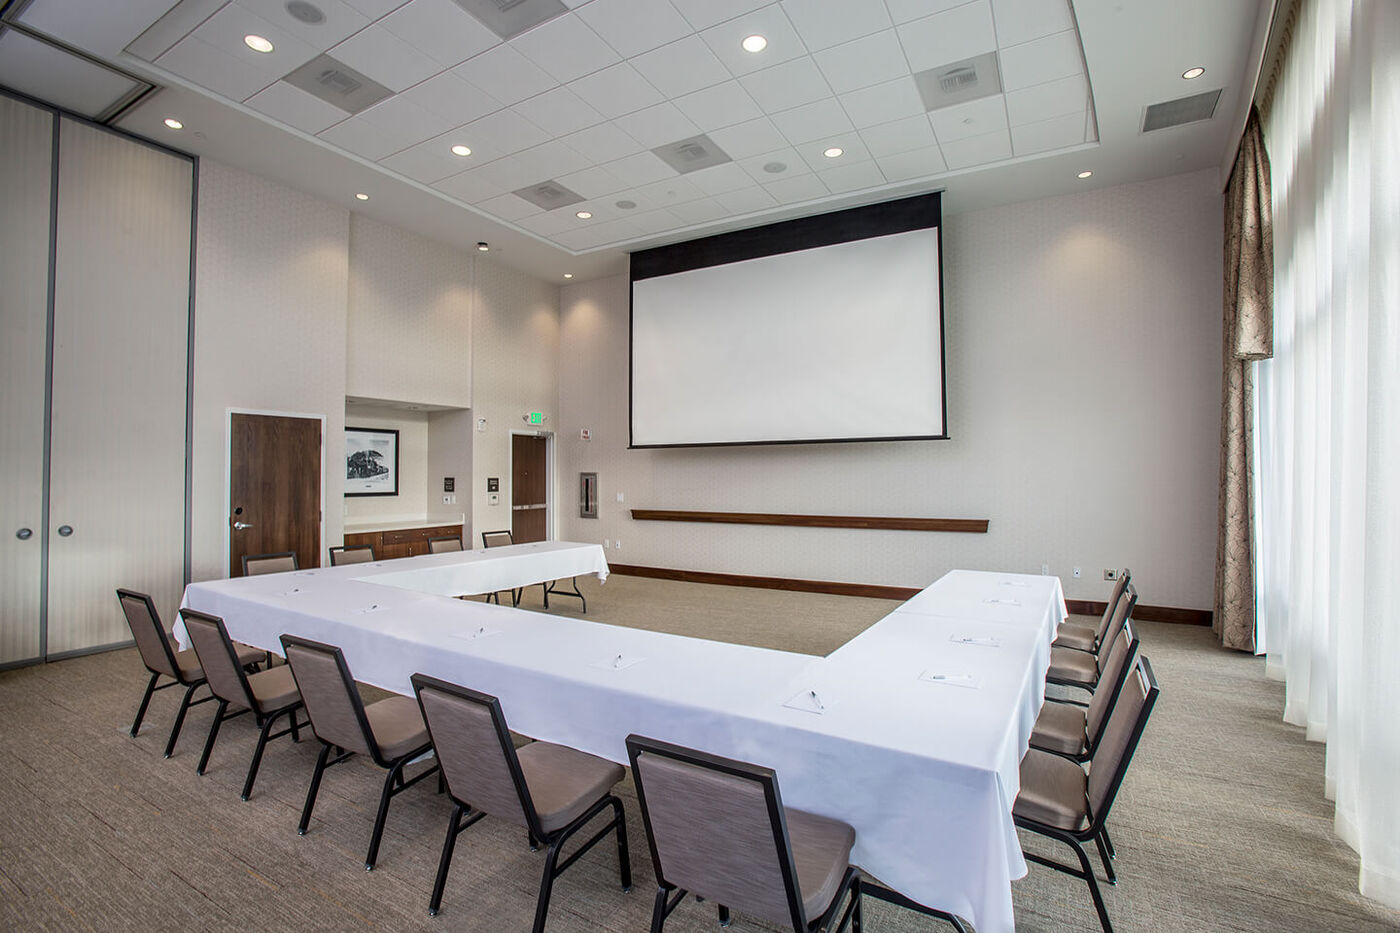 Meeting room with tables, chairs, projector scree